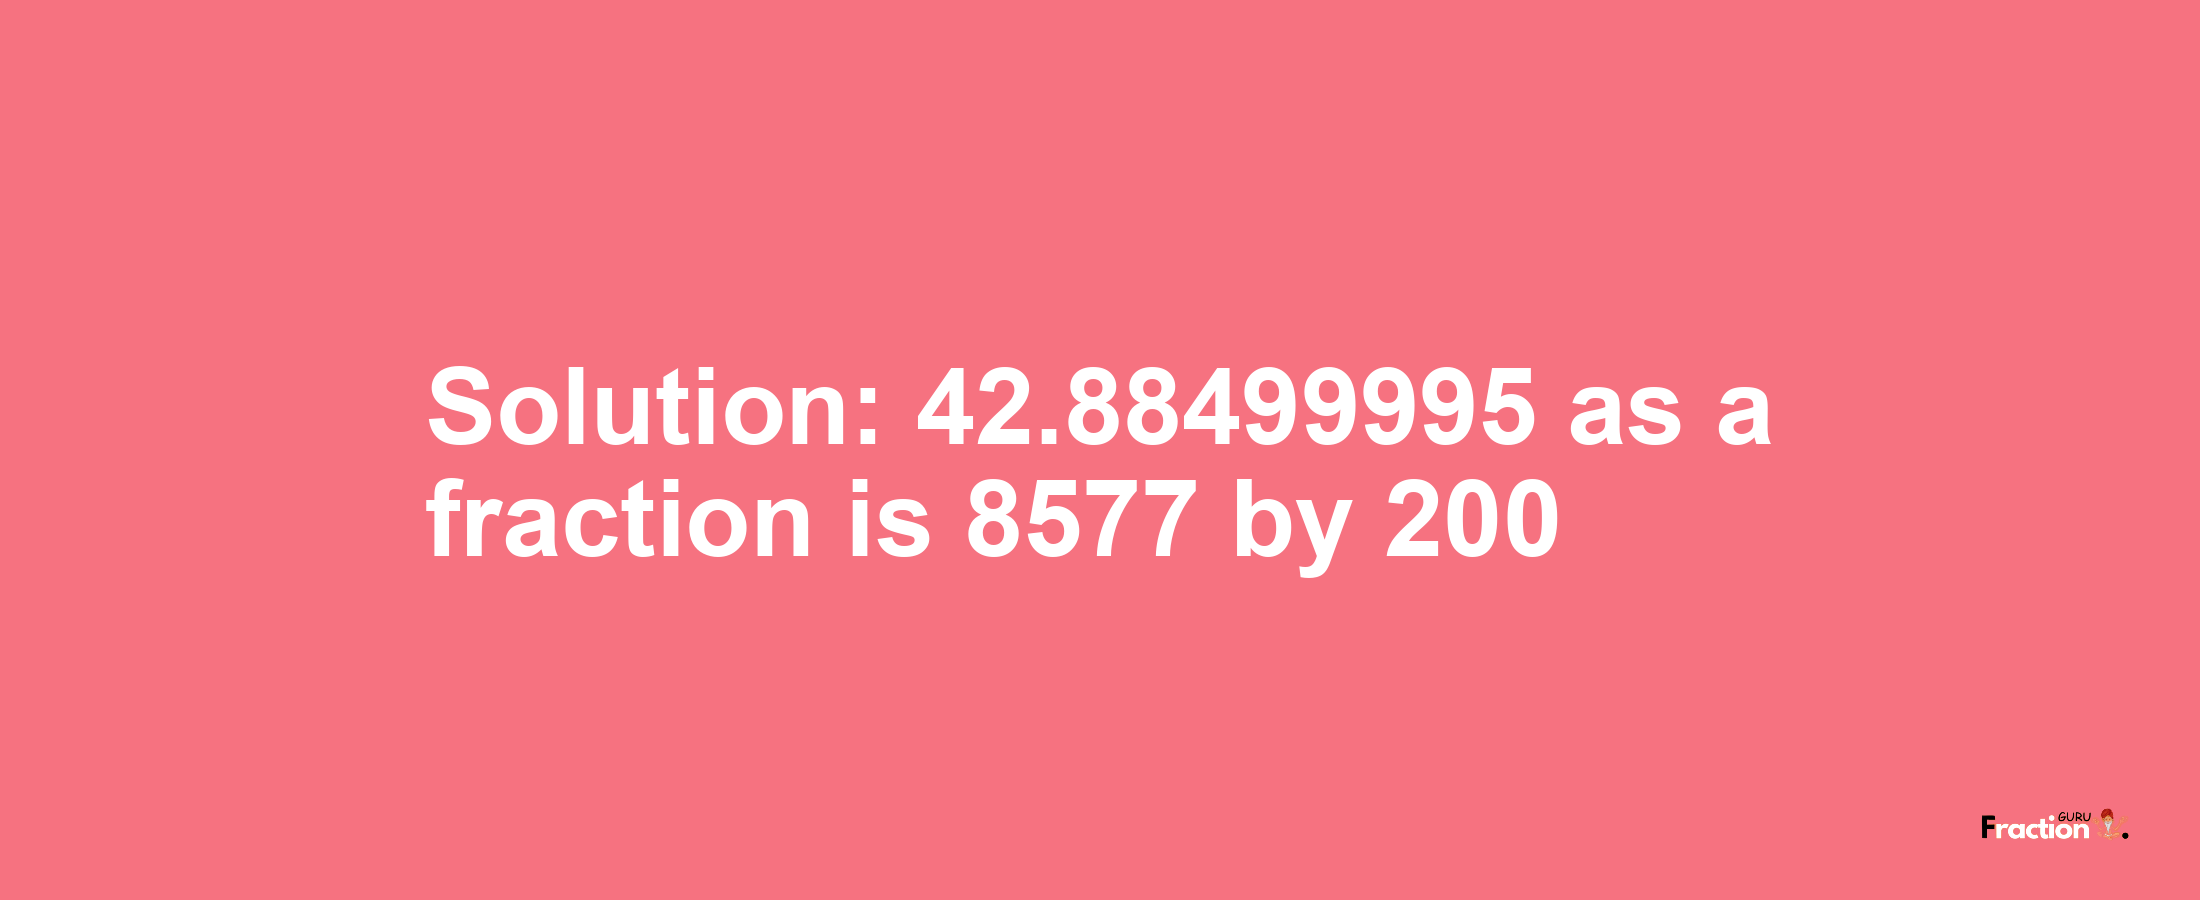 Solution:42.88499995 as a fraction is 8577/200